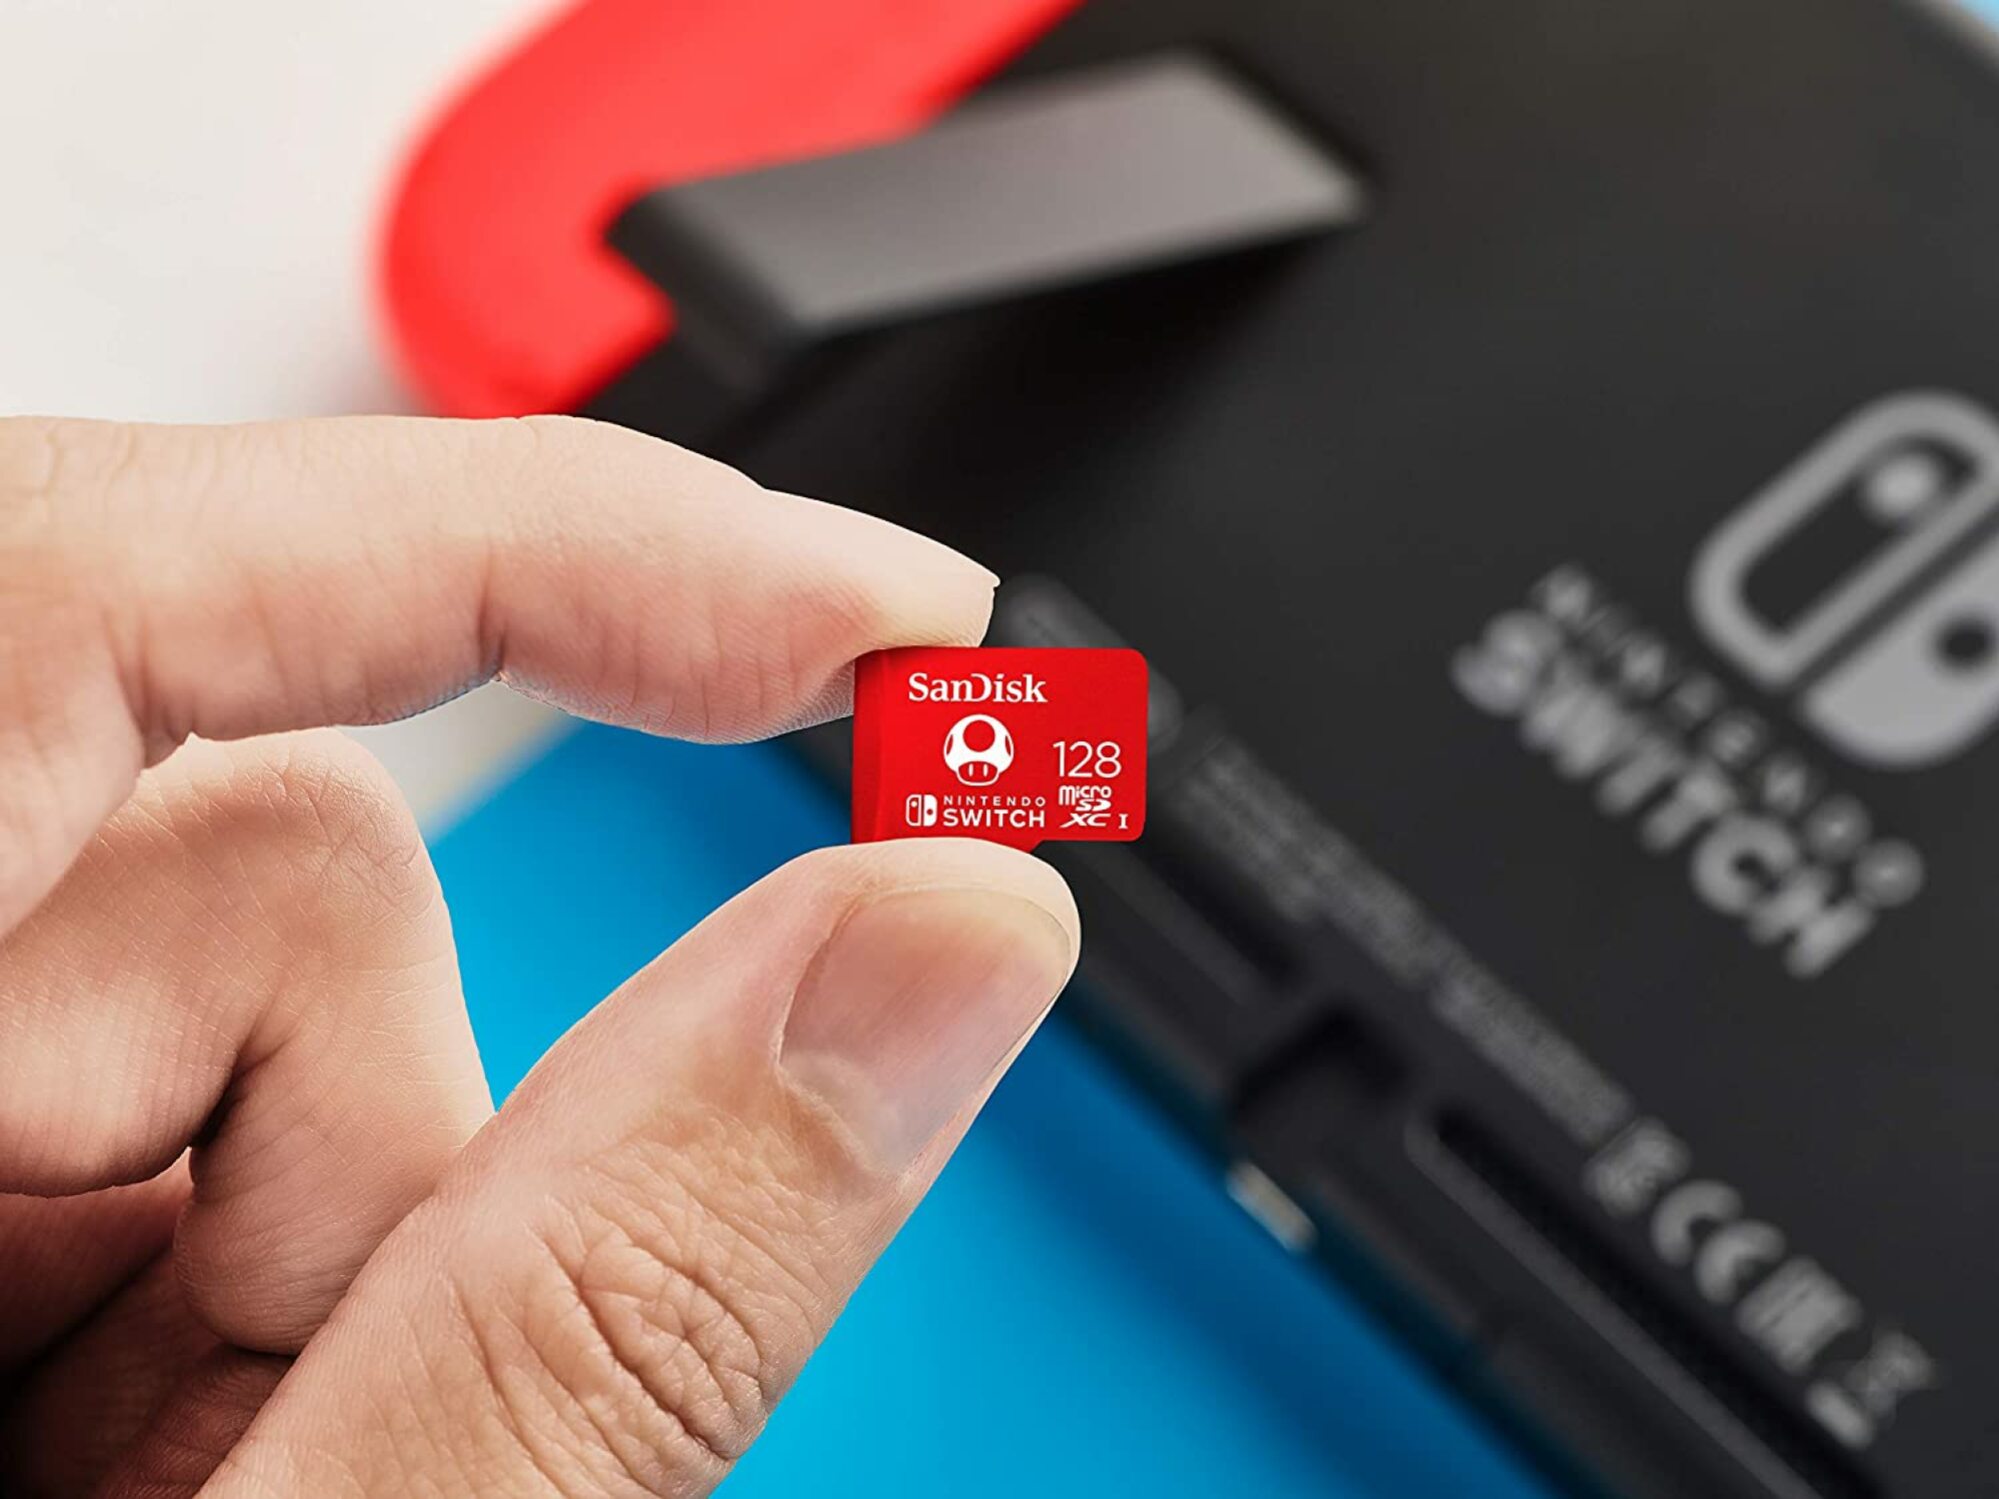 Person holding the SanDisk 128GB microSDXC Card for Nintendo Switch.